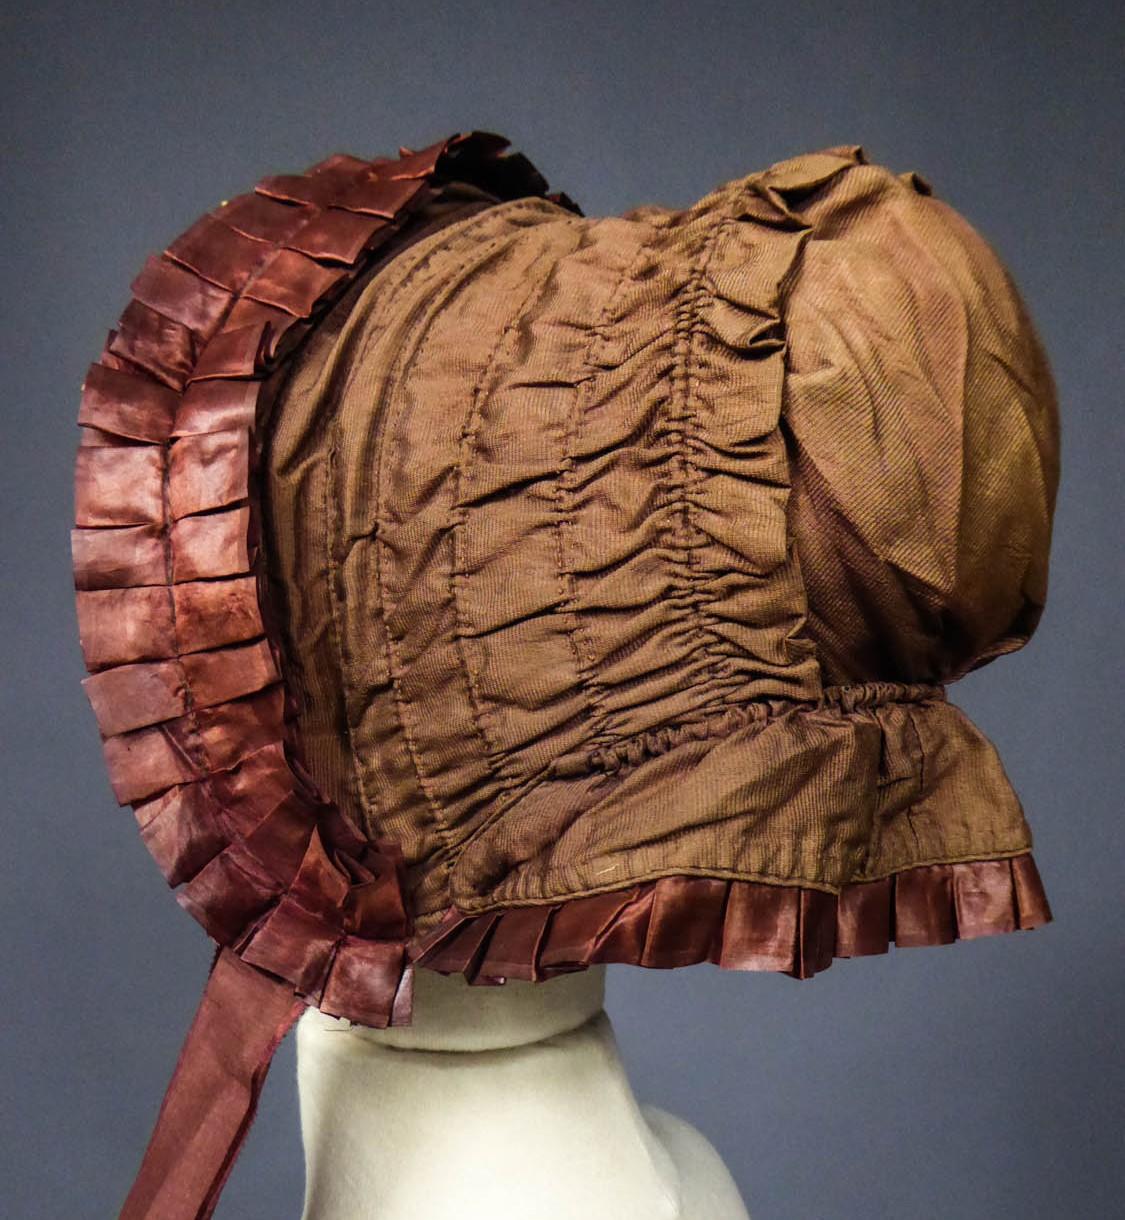 Circa 1860
France

Capote with bavolet in taffeta for a girl of 10/12 years dating from the Victorian period. Spinach green taffeta on framework in iron hoops and ecru tarlatan lining. Work of bouillonné pleats. Closing with large knotted taffeta